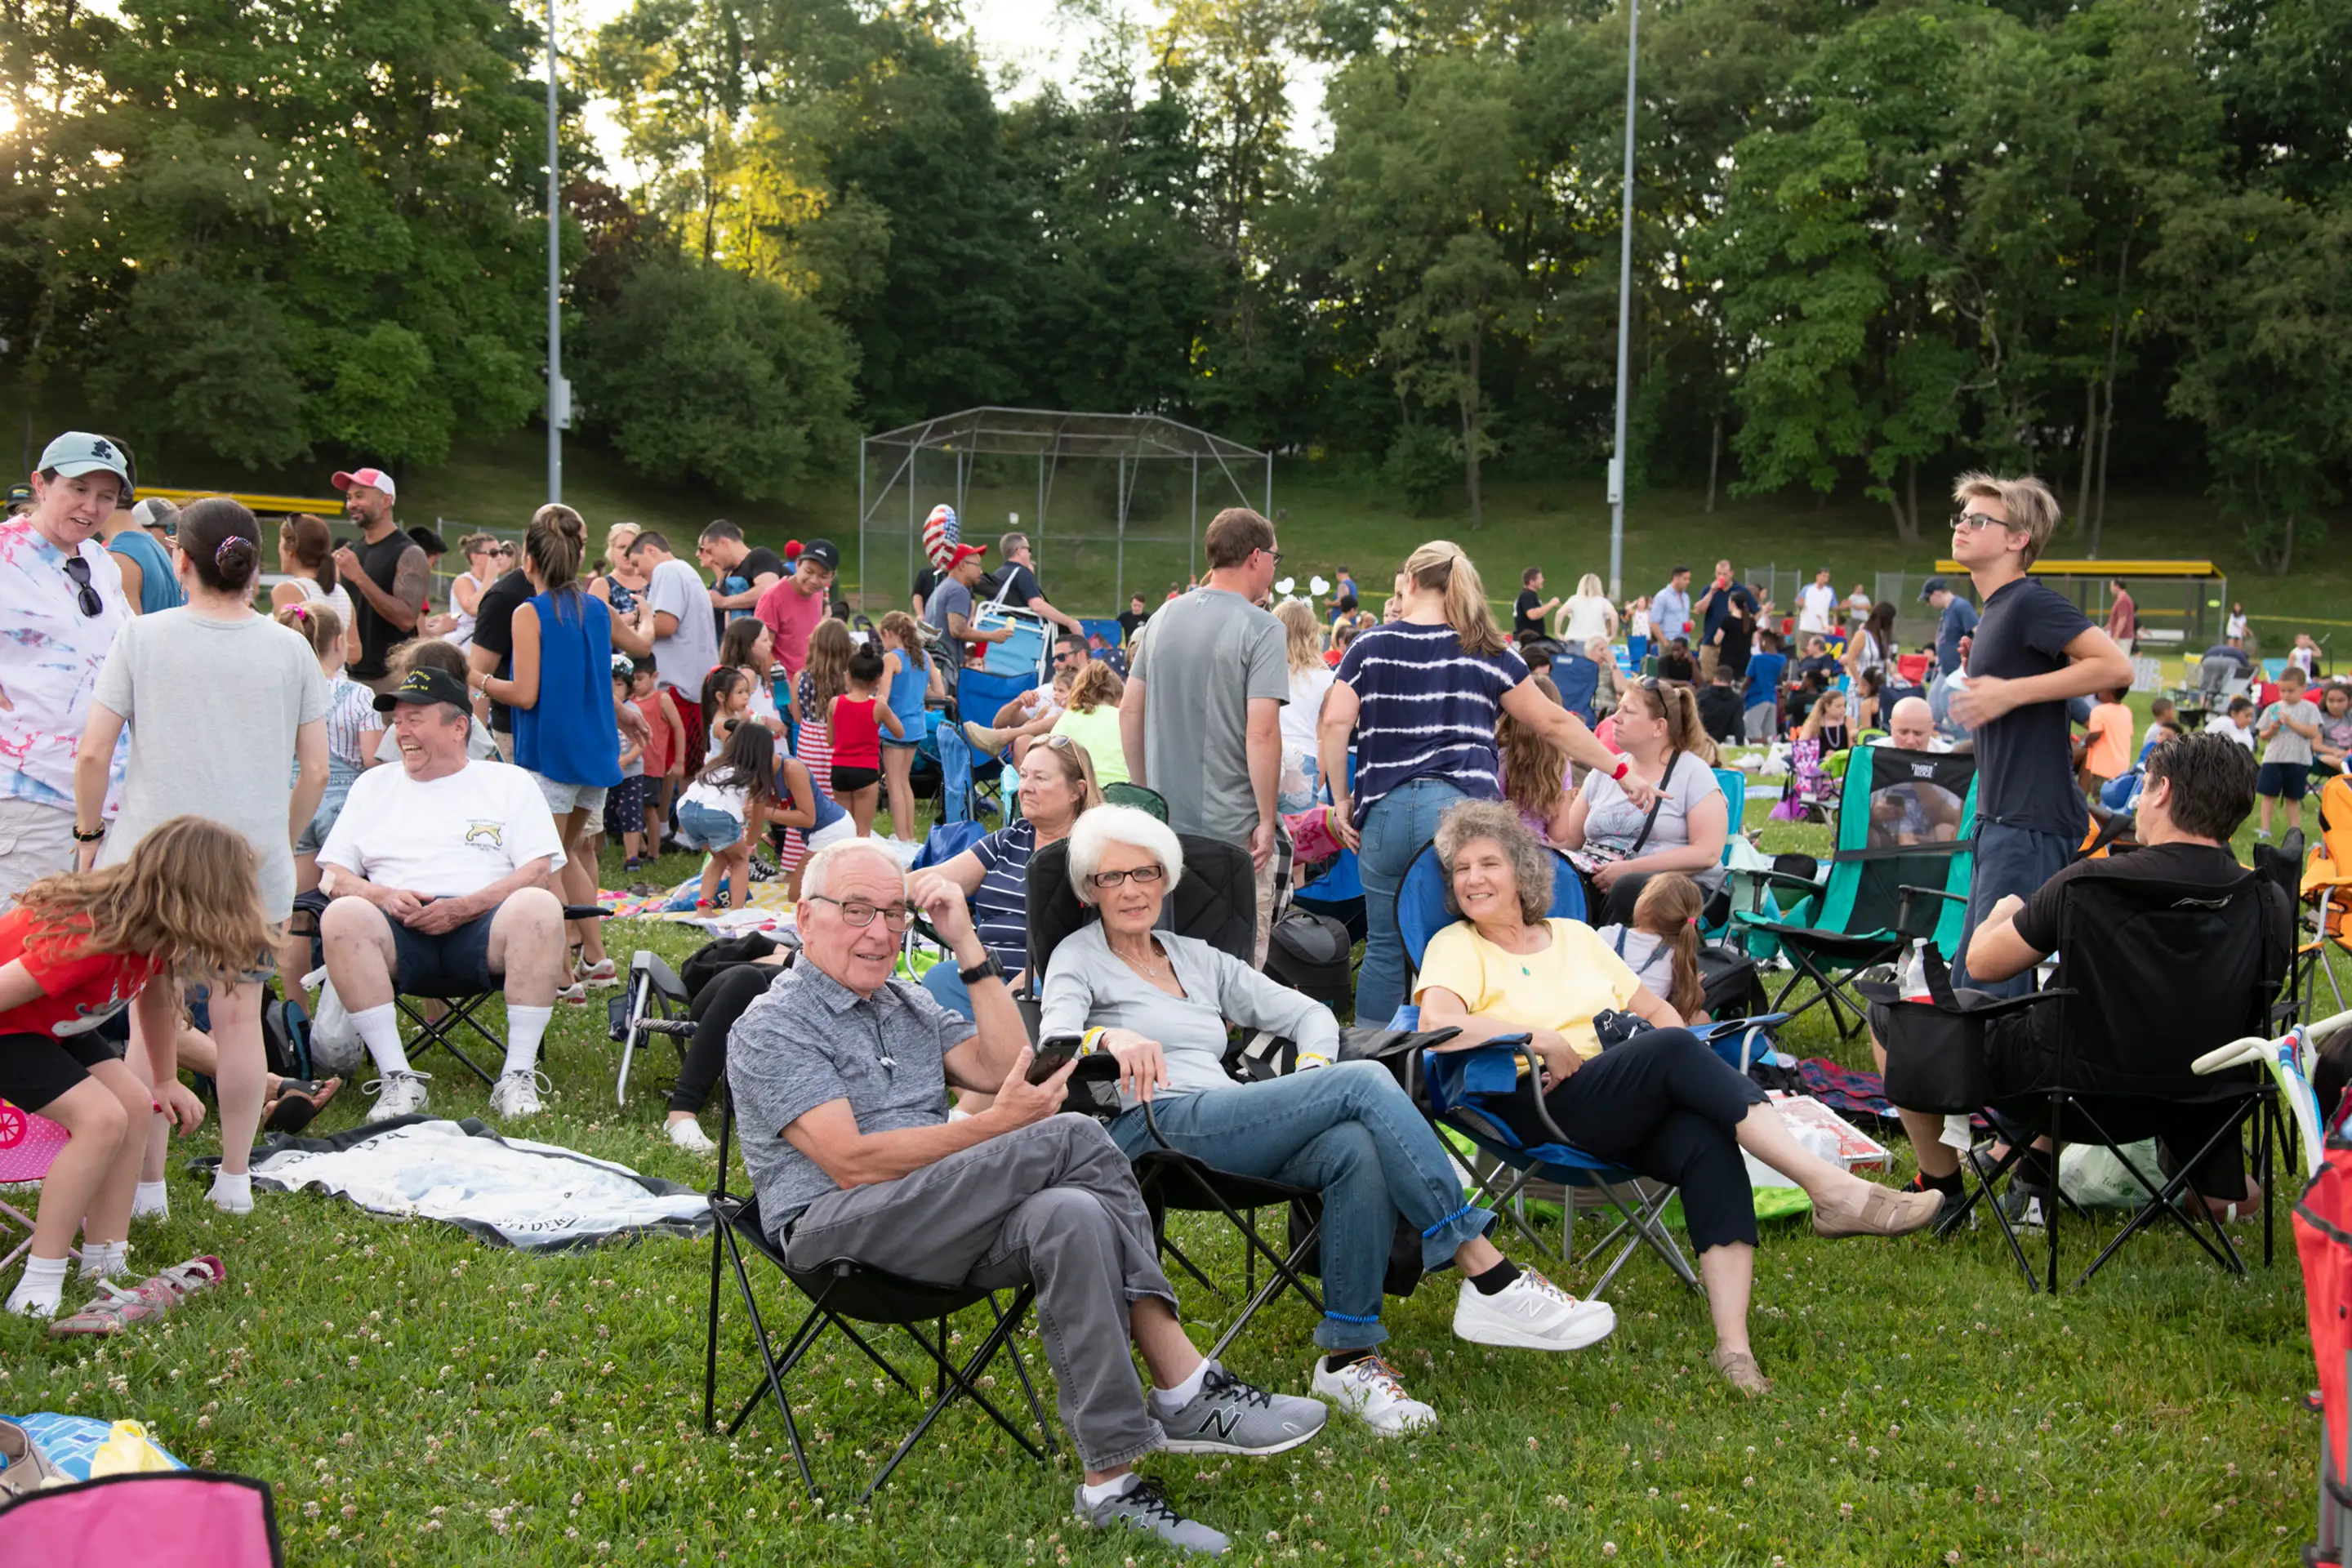 Residents of Clarkstown await a fireworks display.